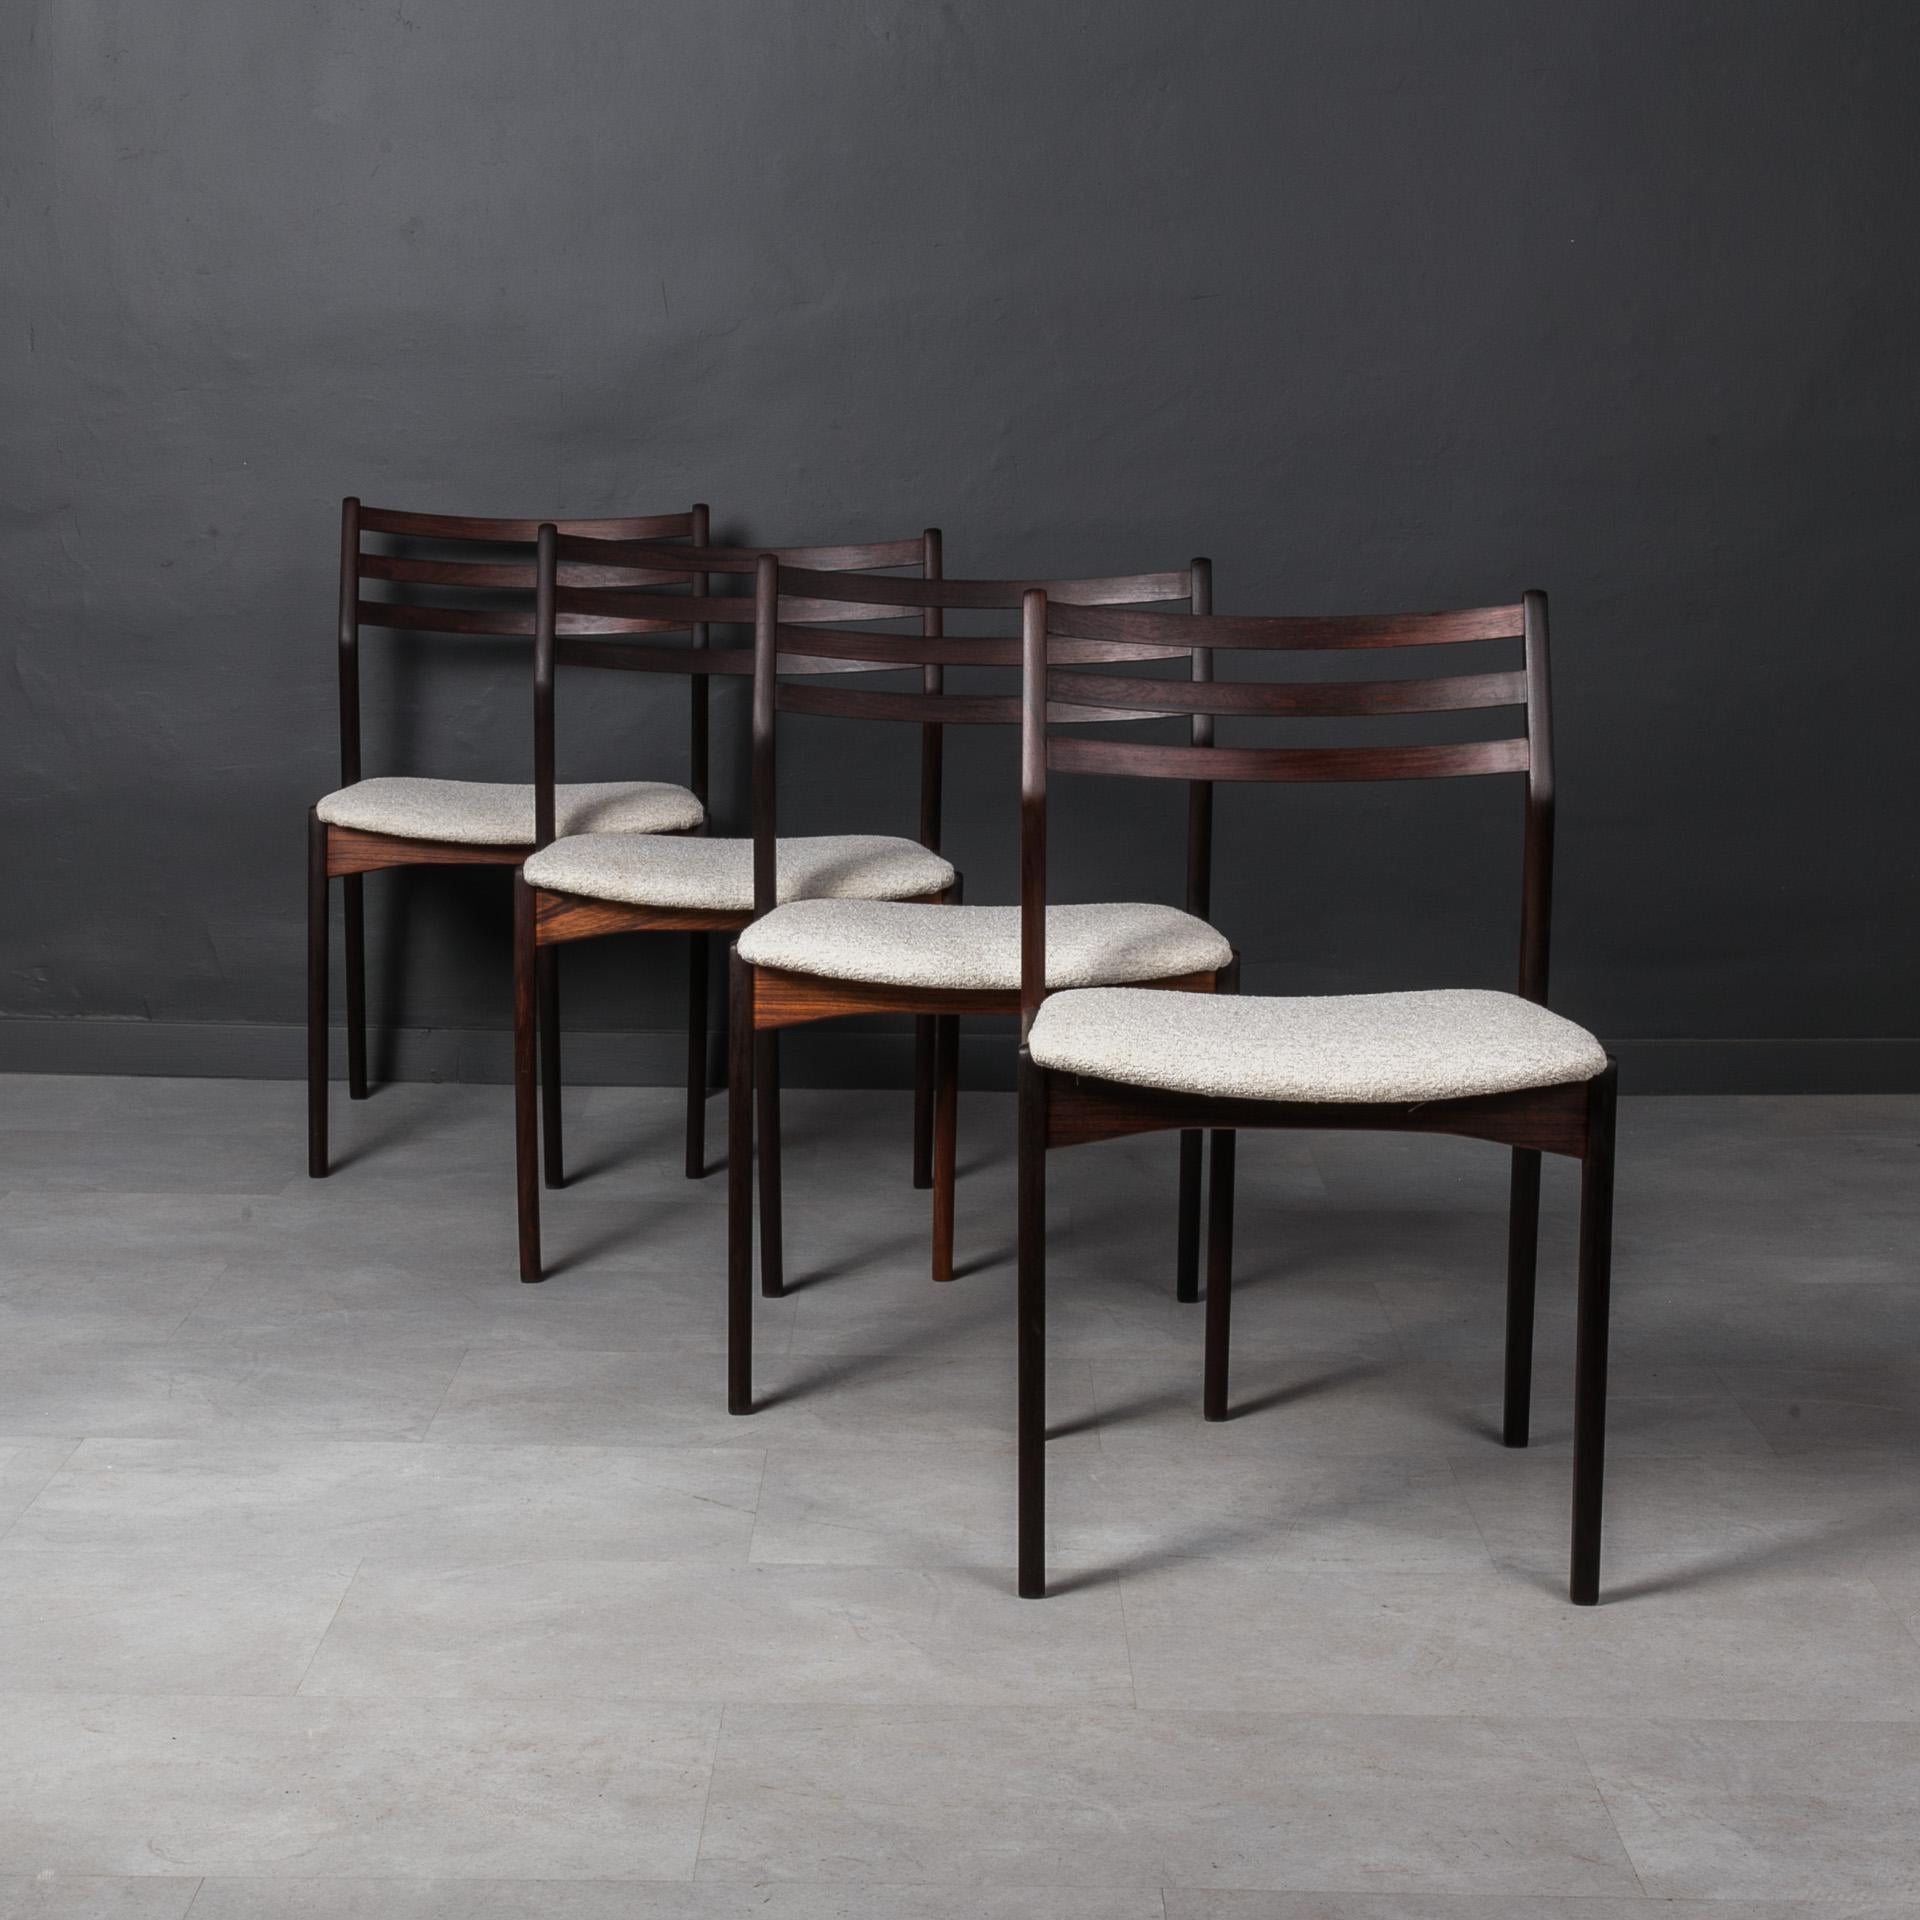 Danish Set of 4 Dining Chairs by Vestervig Eriksen, 1960s, Fully Renovated For Sale